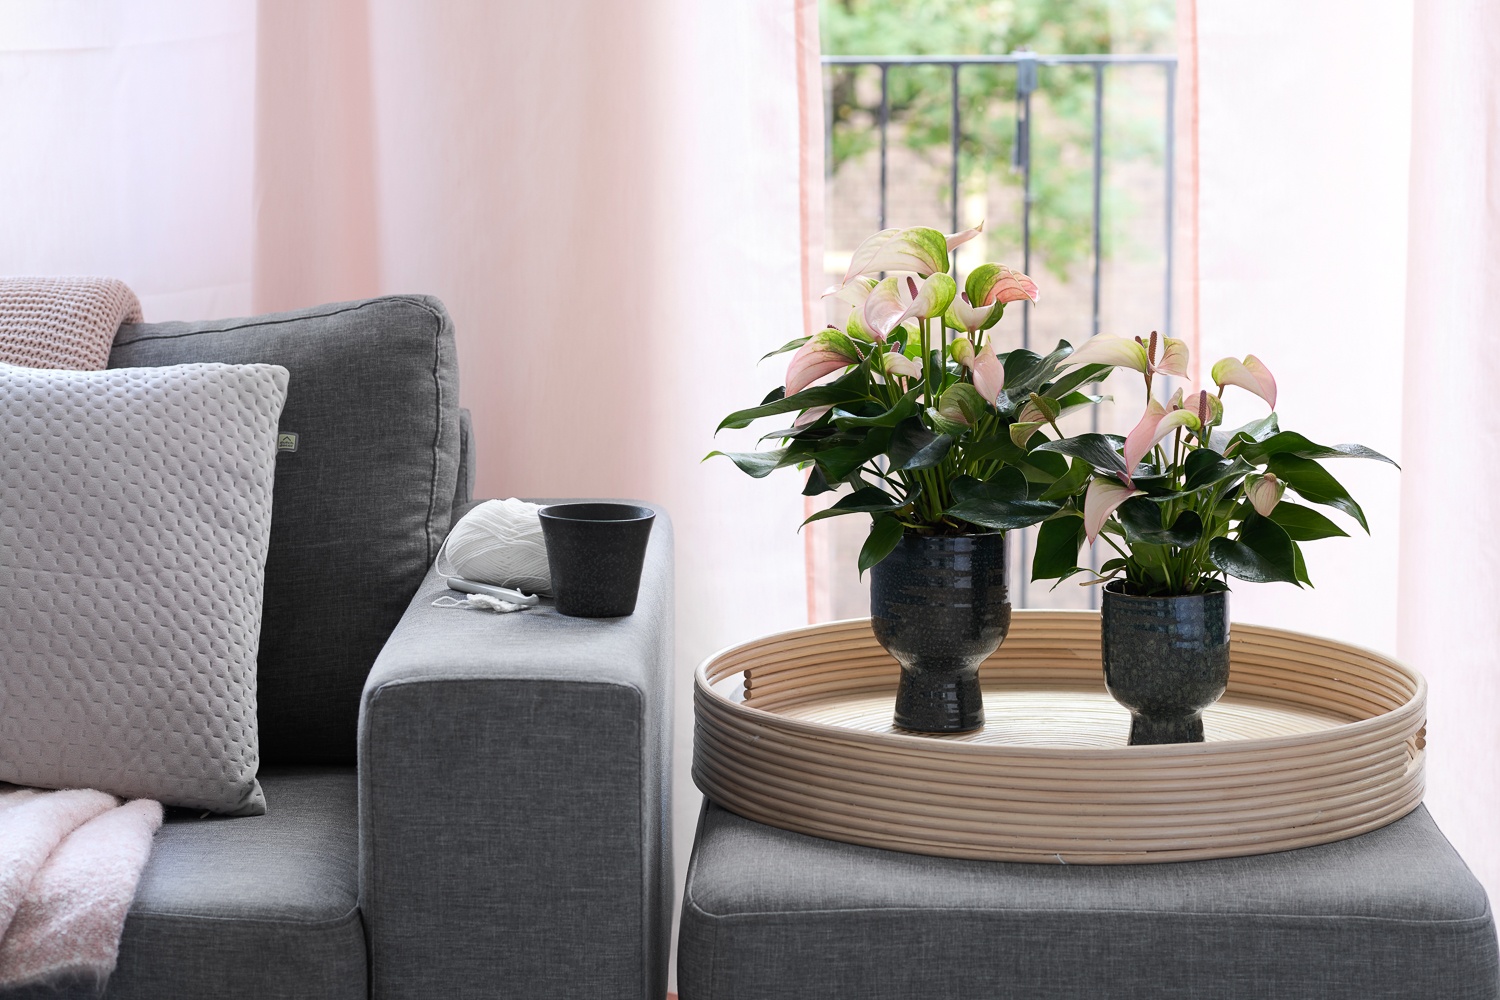 How to move houseplants to your new home